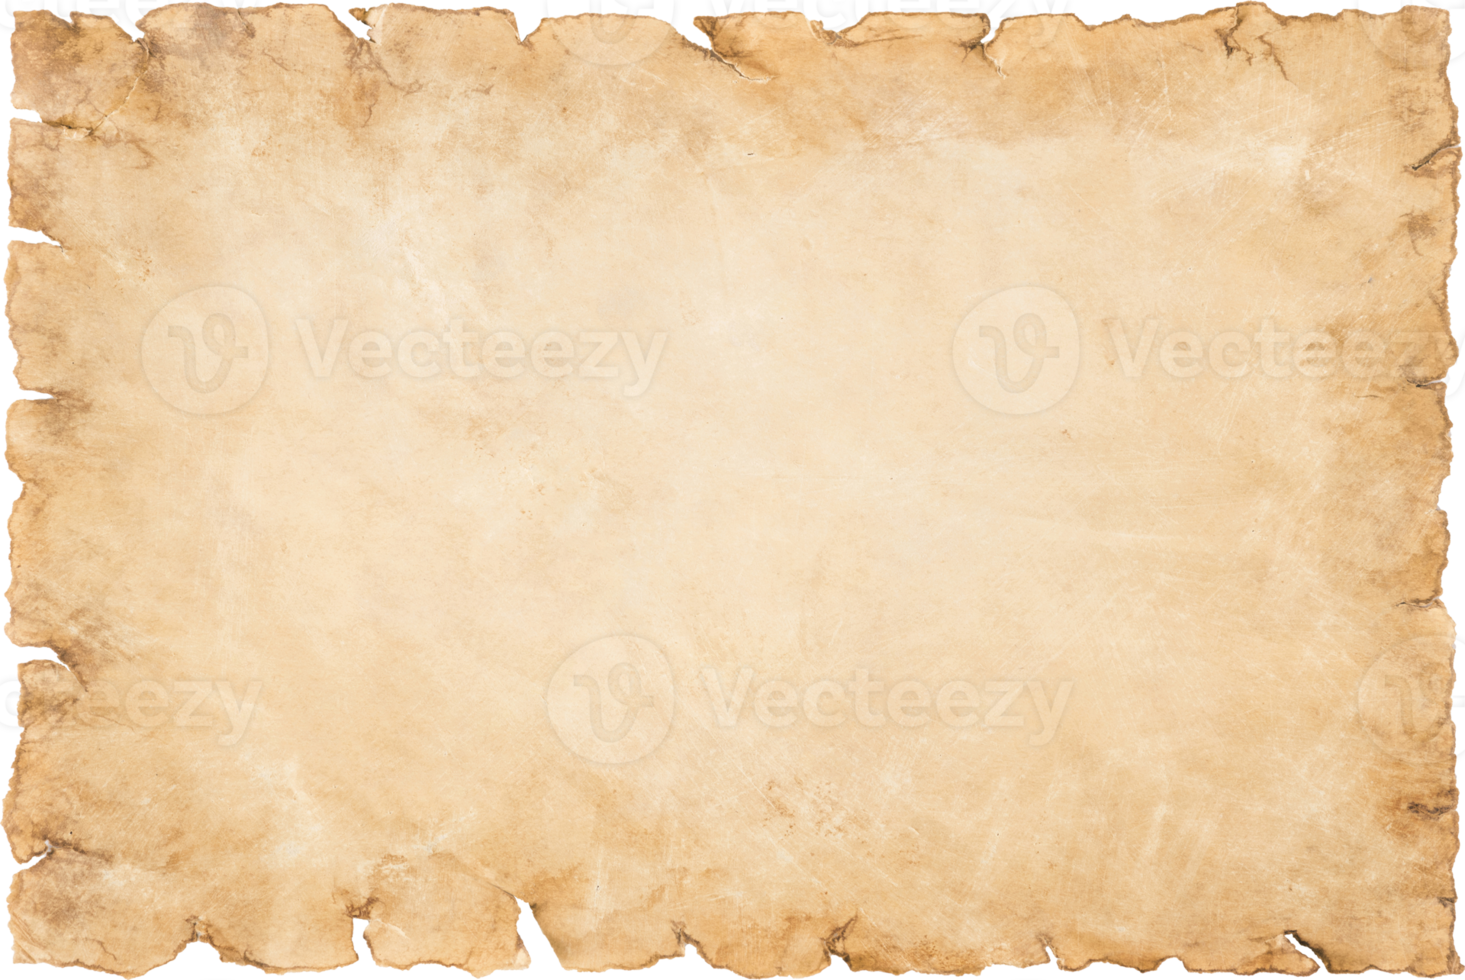 https://static.vecteezy.com/system/resources/previews/012/981/804/non_2x/old-parchment-paper-sheet-vintage-aged-or-texture-background-png.png